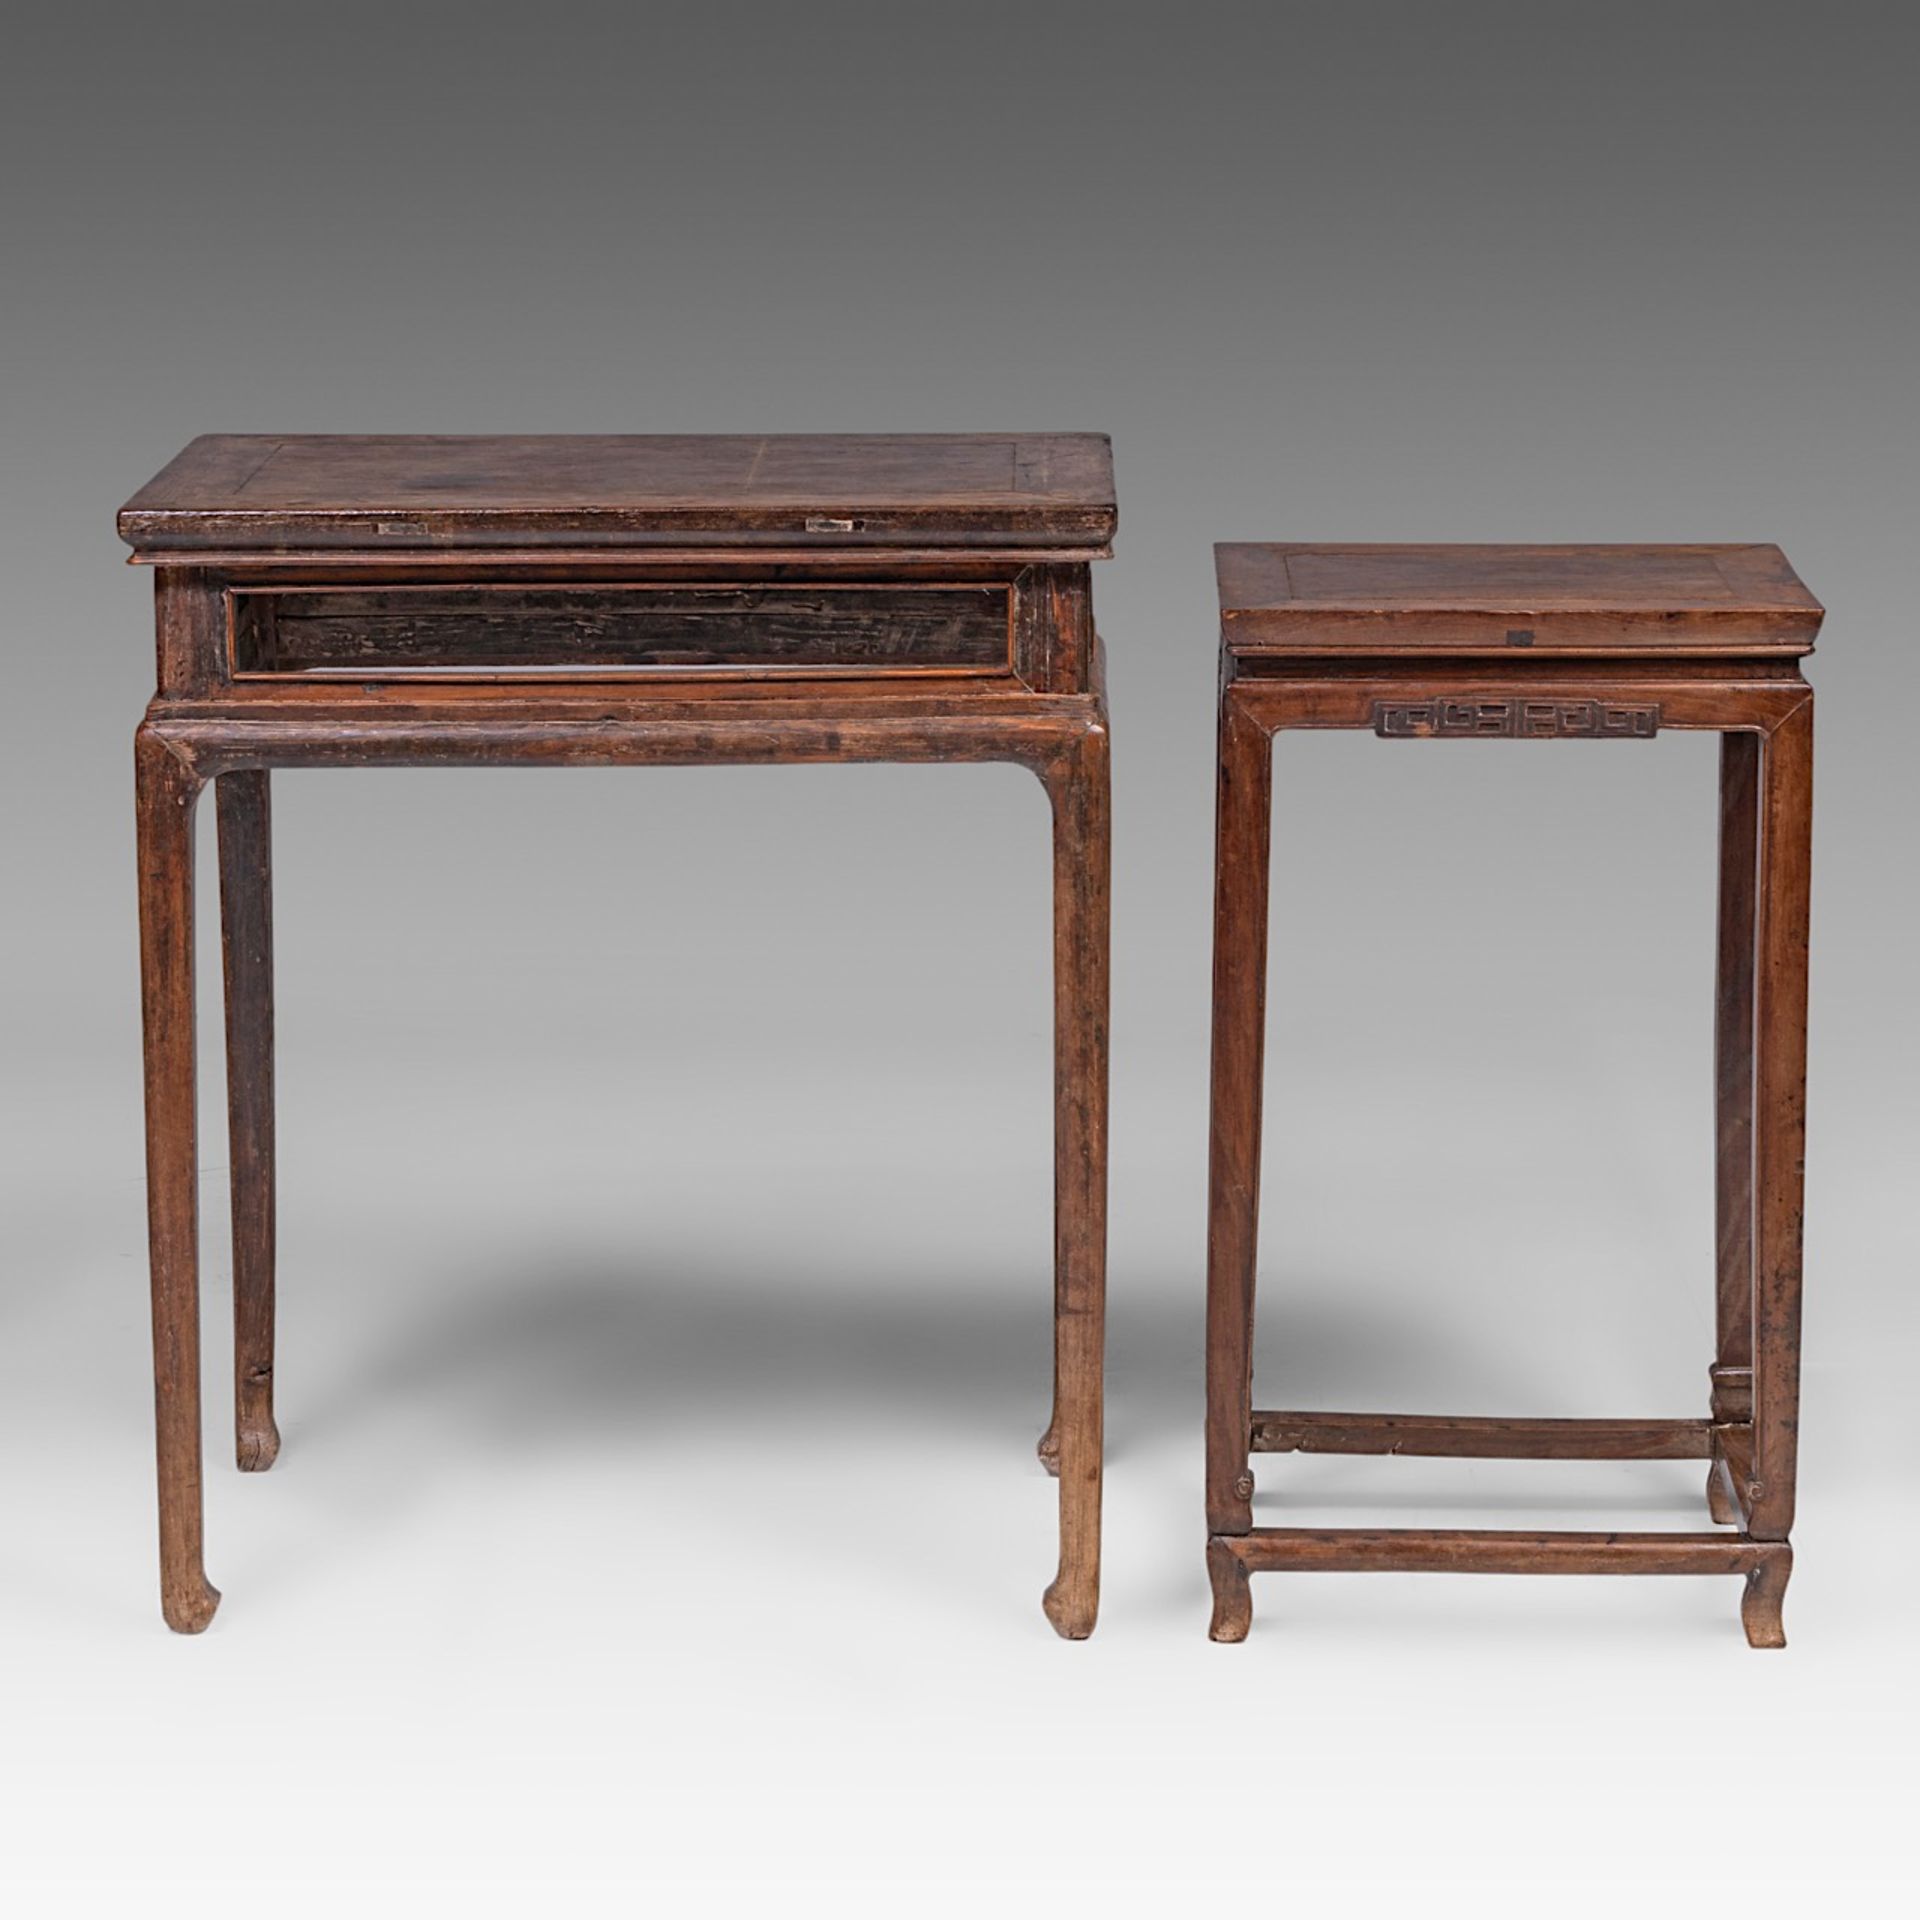 Two Chinese hardwood side tables, mid - late Qing dynasty, largest H 82 - 69 x 42 cm - Bild 2 aus 7